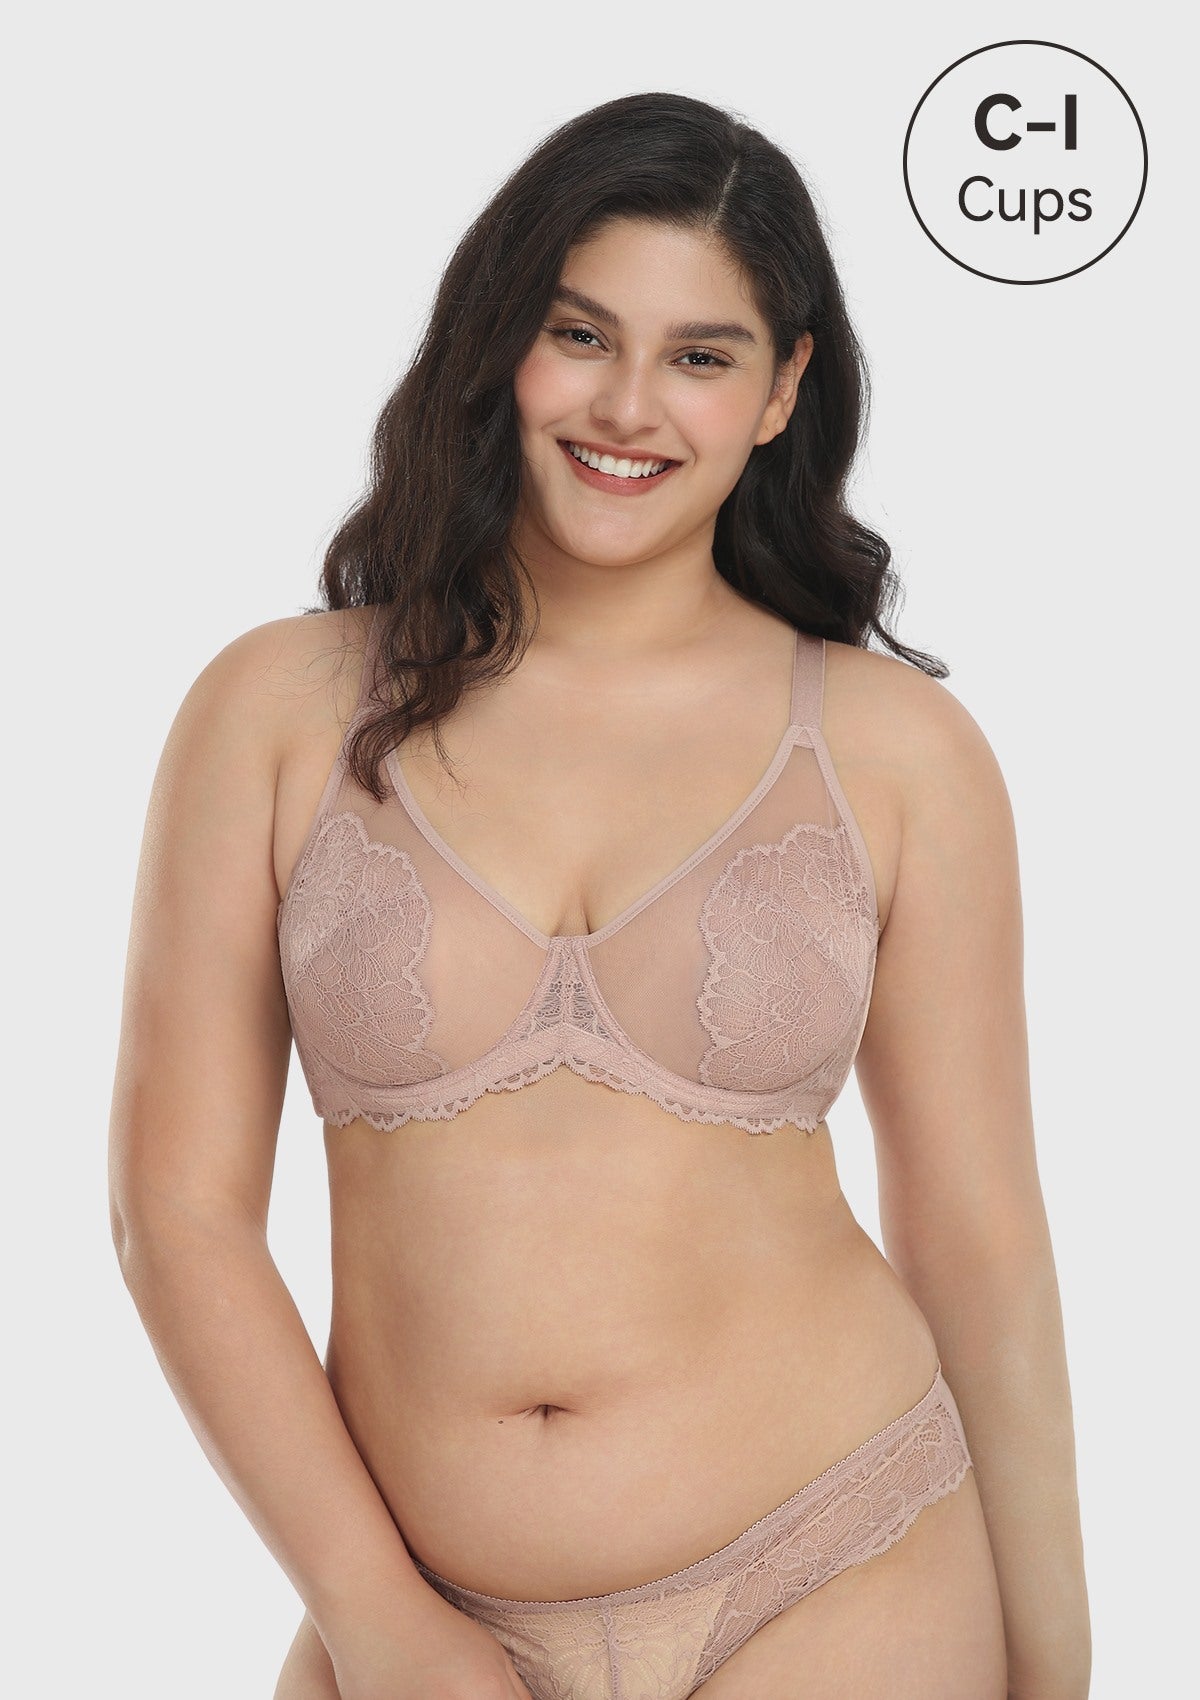 HSIA Blossom Plus Size Lace Bra - Wired, Unpadded, See-Through - Dark Pink / 40 / C